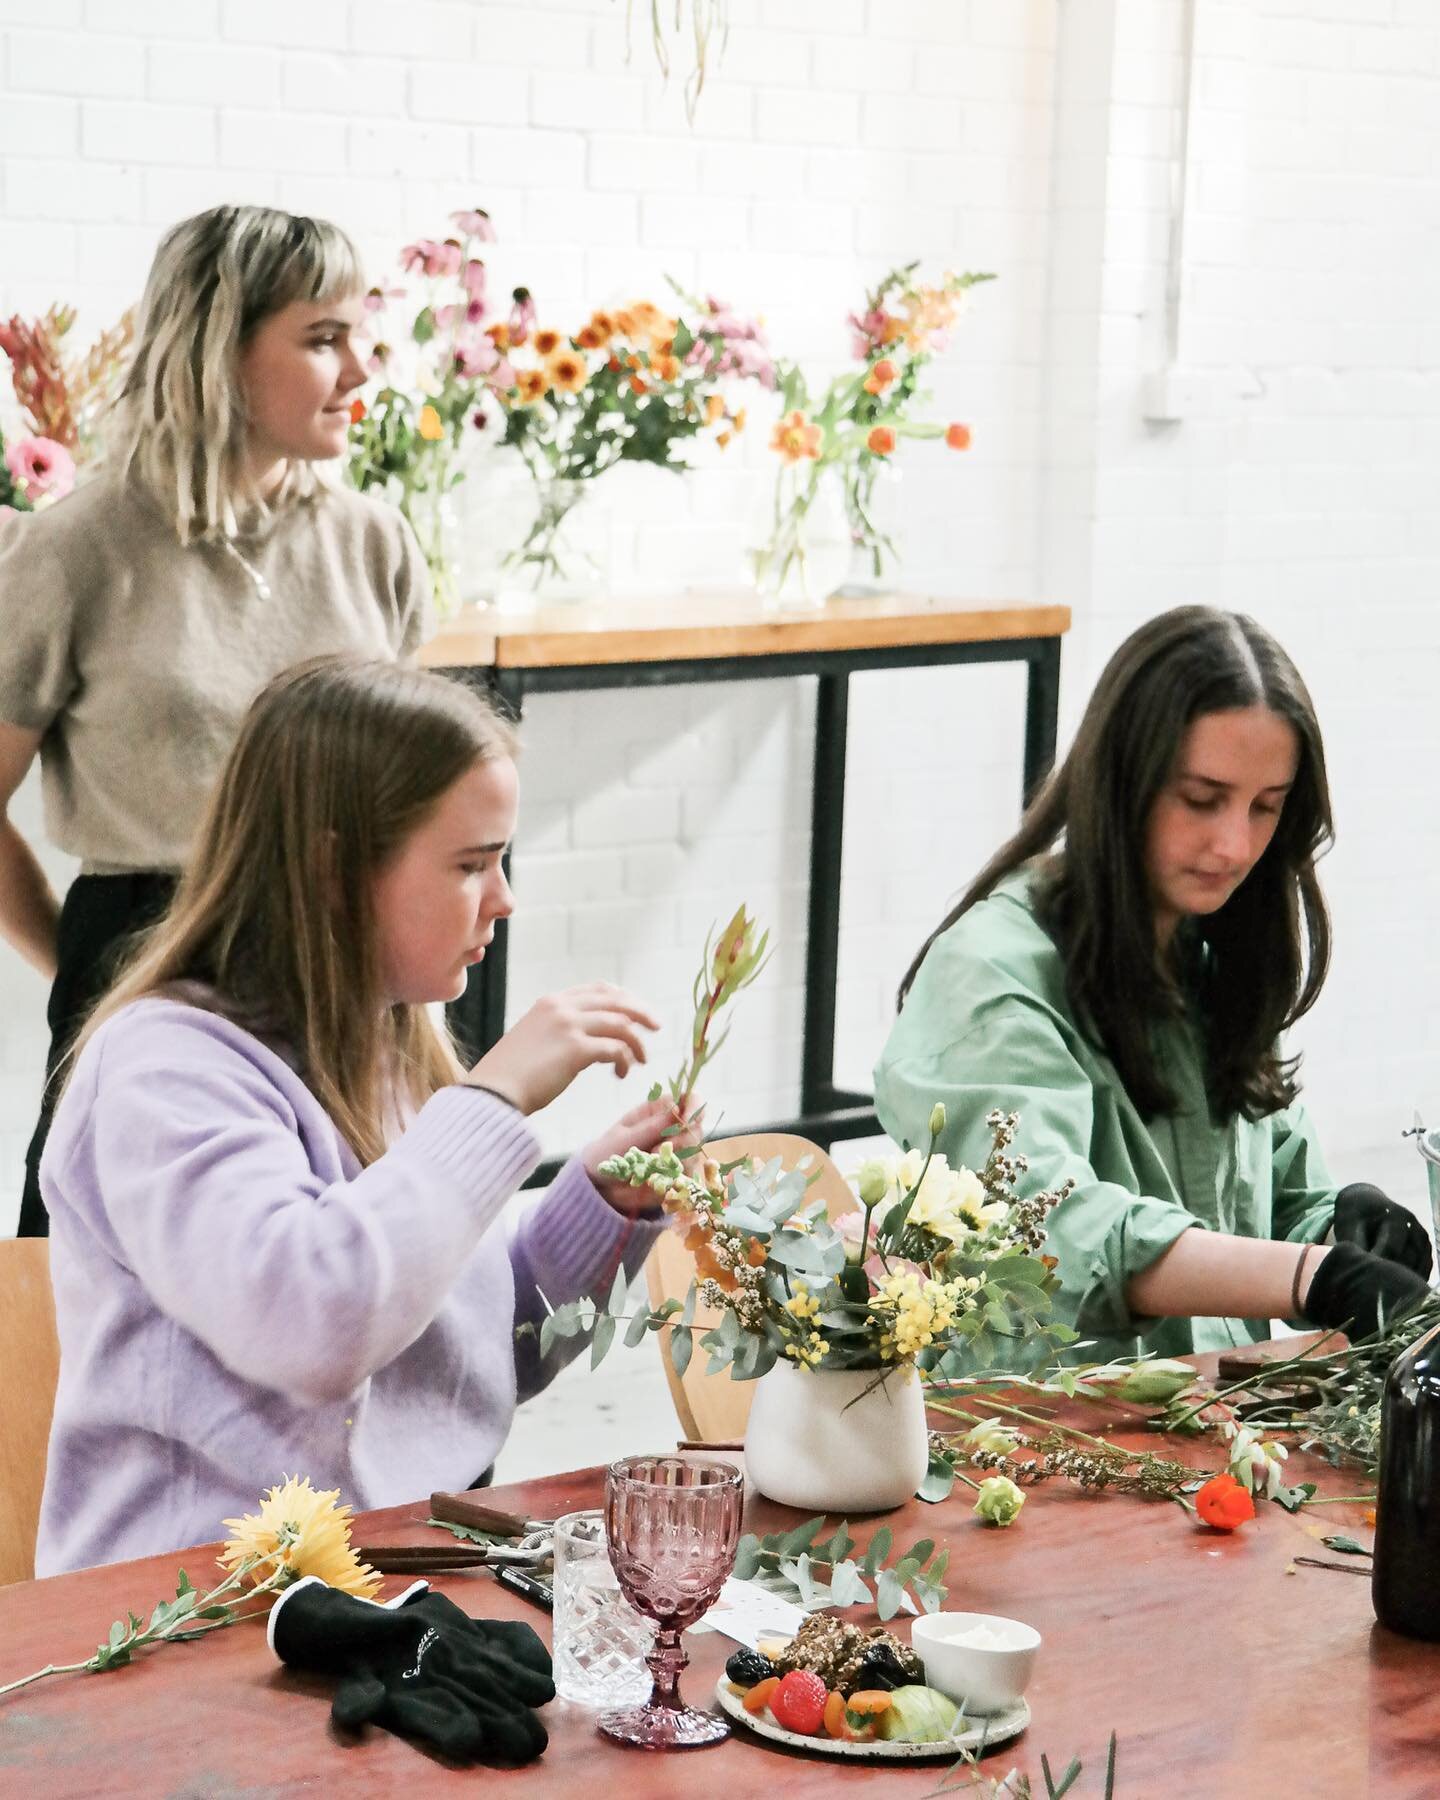 NEW WORKSHOP ONLINE 💐✂️

Flower Centrepiece Workshop! 

Learn how to create your very own fresh floral centrepiece using fresh, seasonal, Australian grown flowers without the use of toxic floral-foam! 🌏🫶

What&rsquo;s Included:
- Fresh, seasonal, 